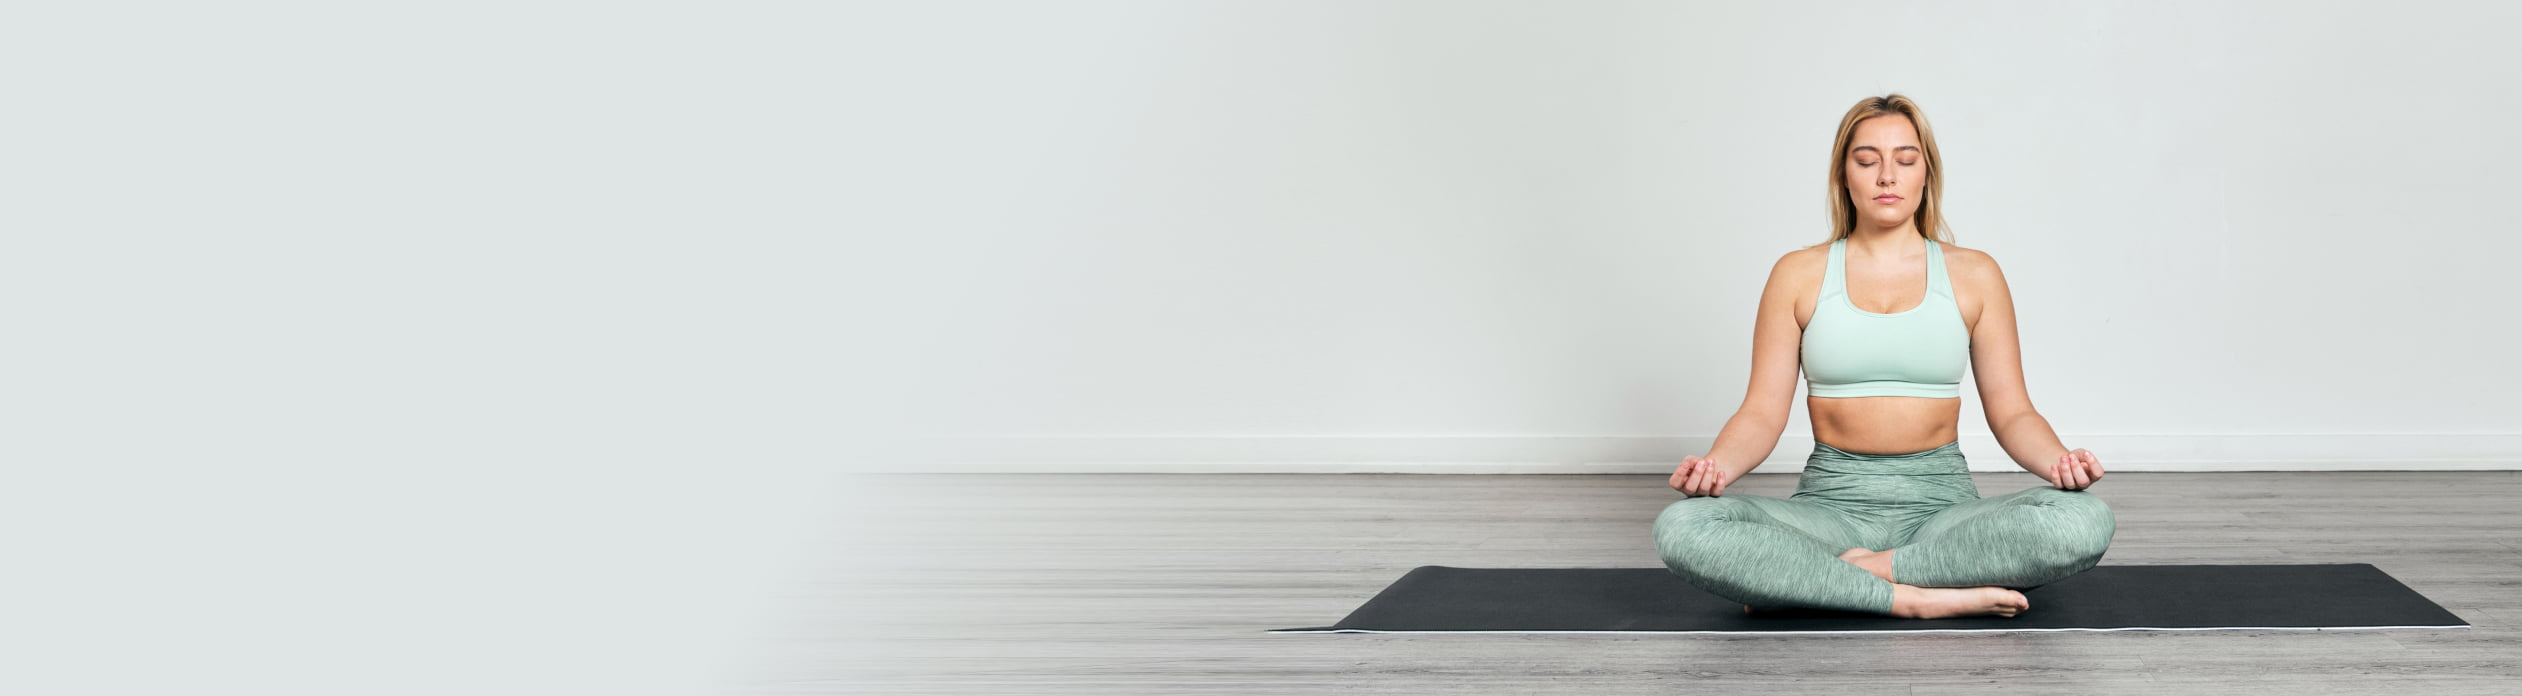 Woman mindfully meditating with eyes closed on the floor